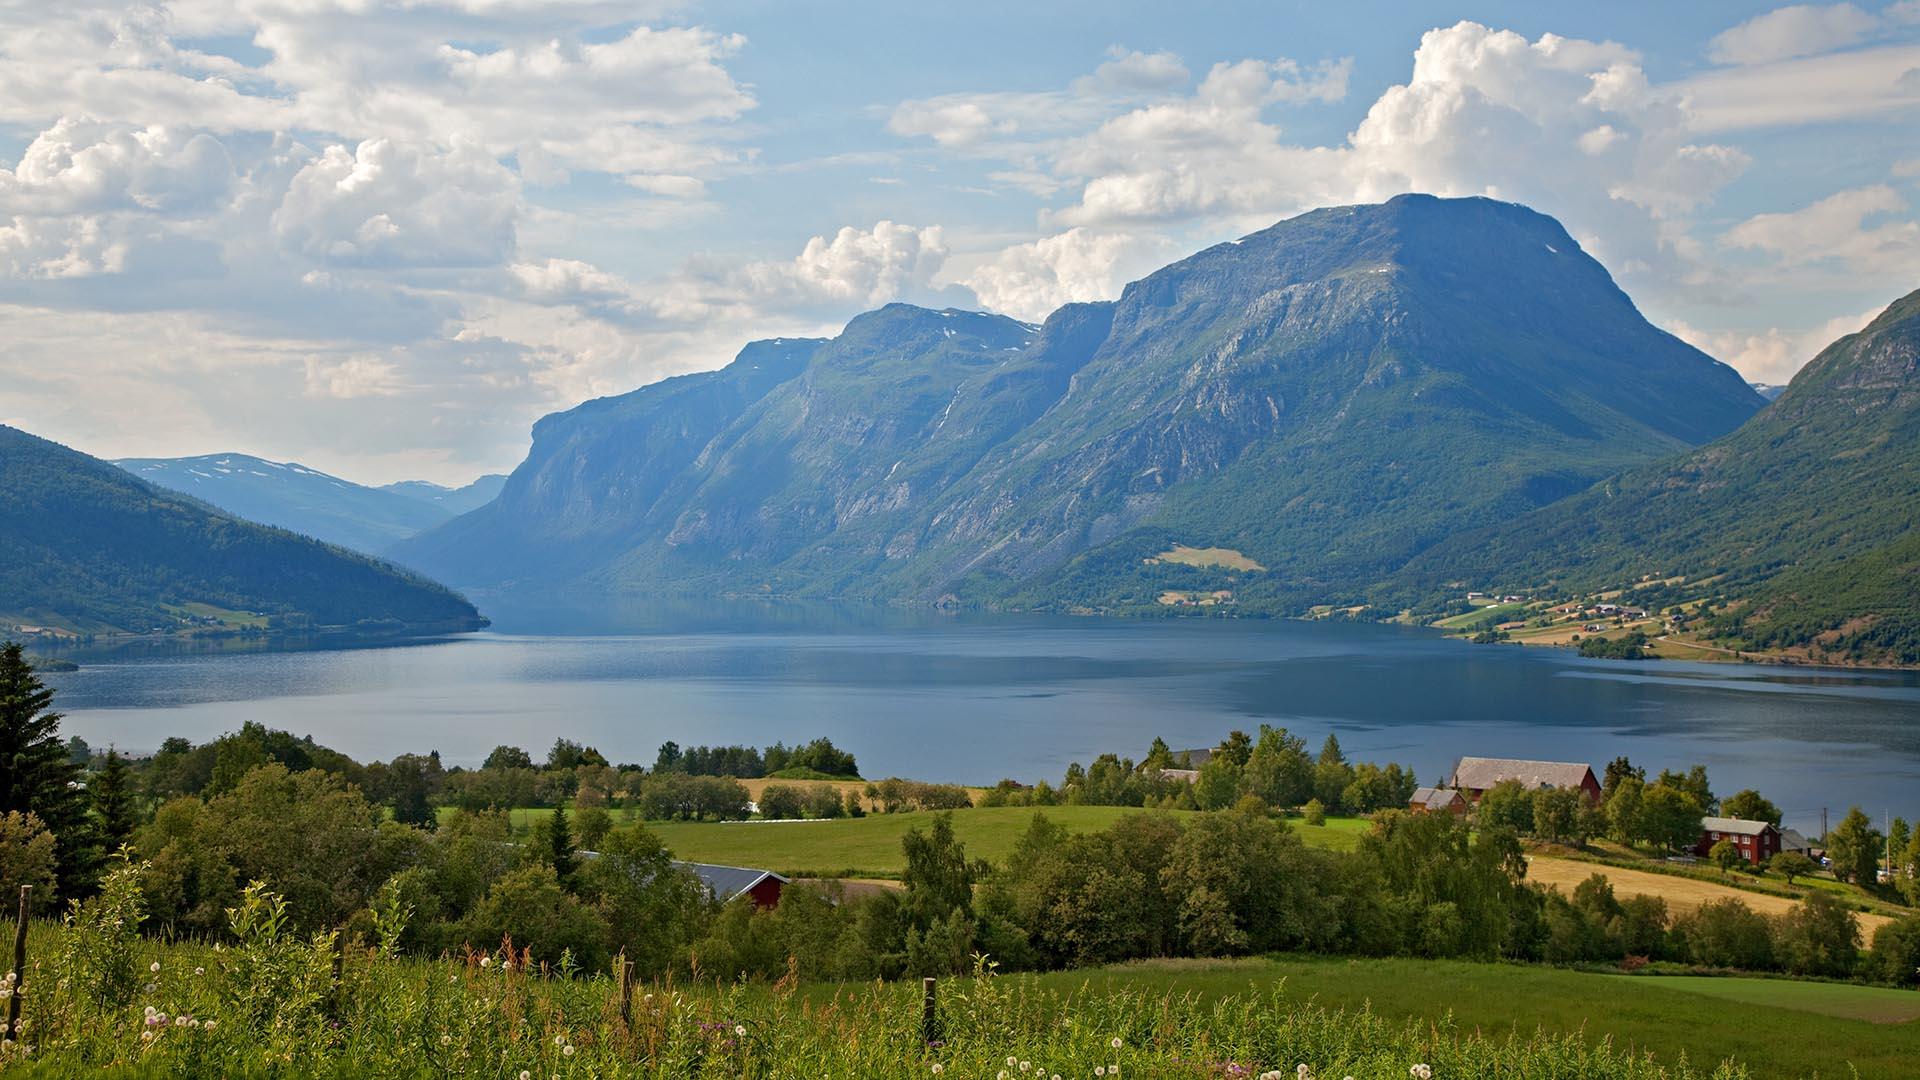 Cultural landscape with green meadows and fields and some trees inbetween in front of a large lake with a mighty mountain massif in the background.